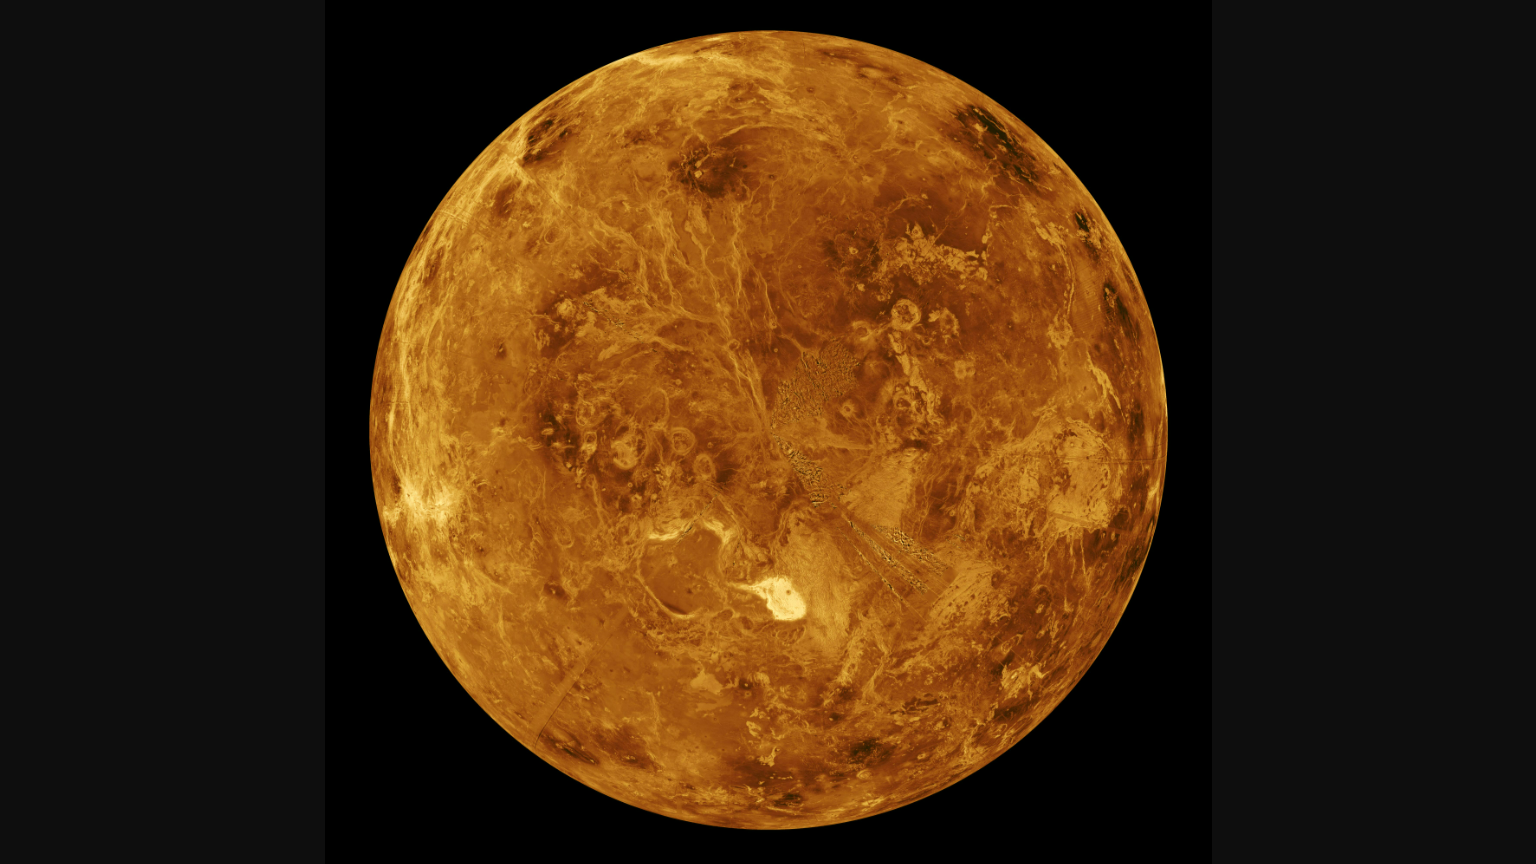 If Venus had Earth-like plate tectonics in its distant past, did it have life too? Space